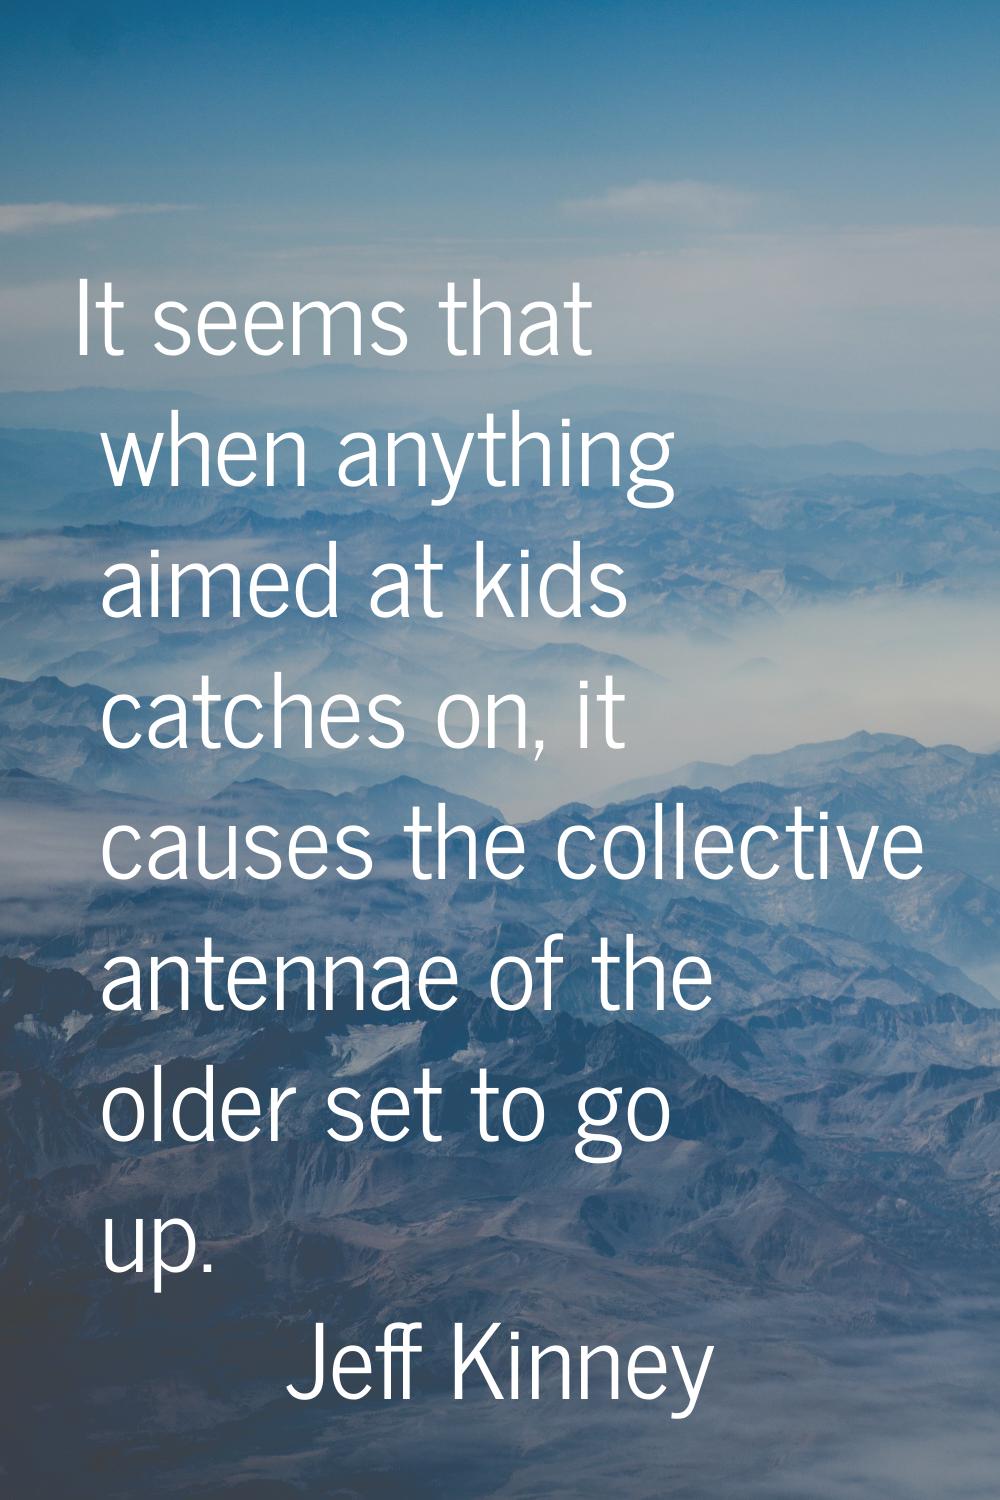 It seems that when anything aimed at kids catches on, it causes the collective antennae of the olde